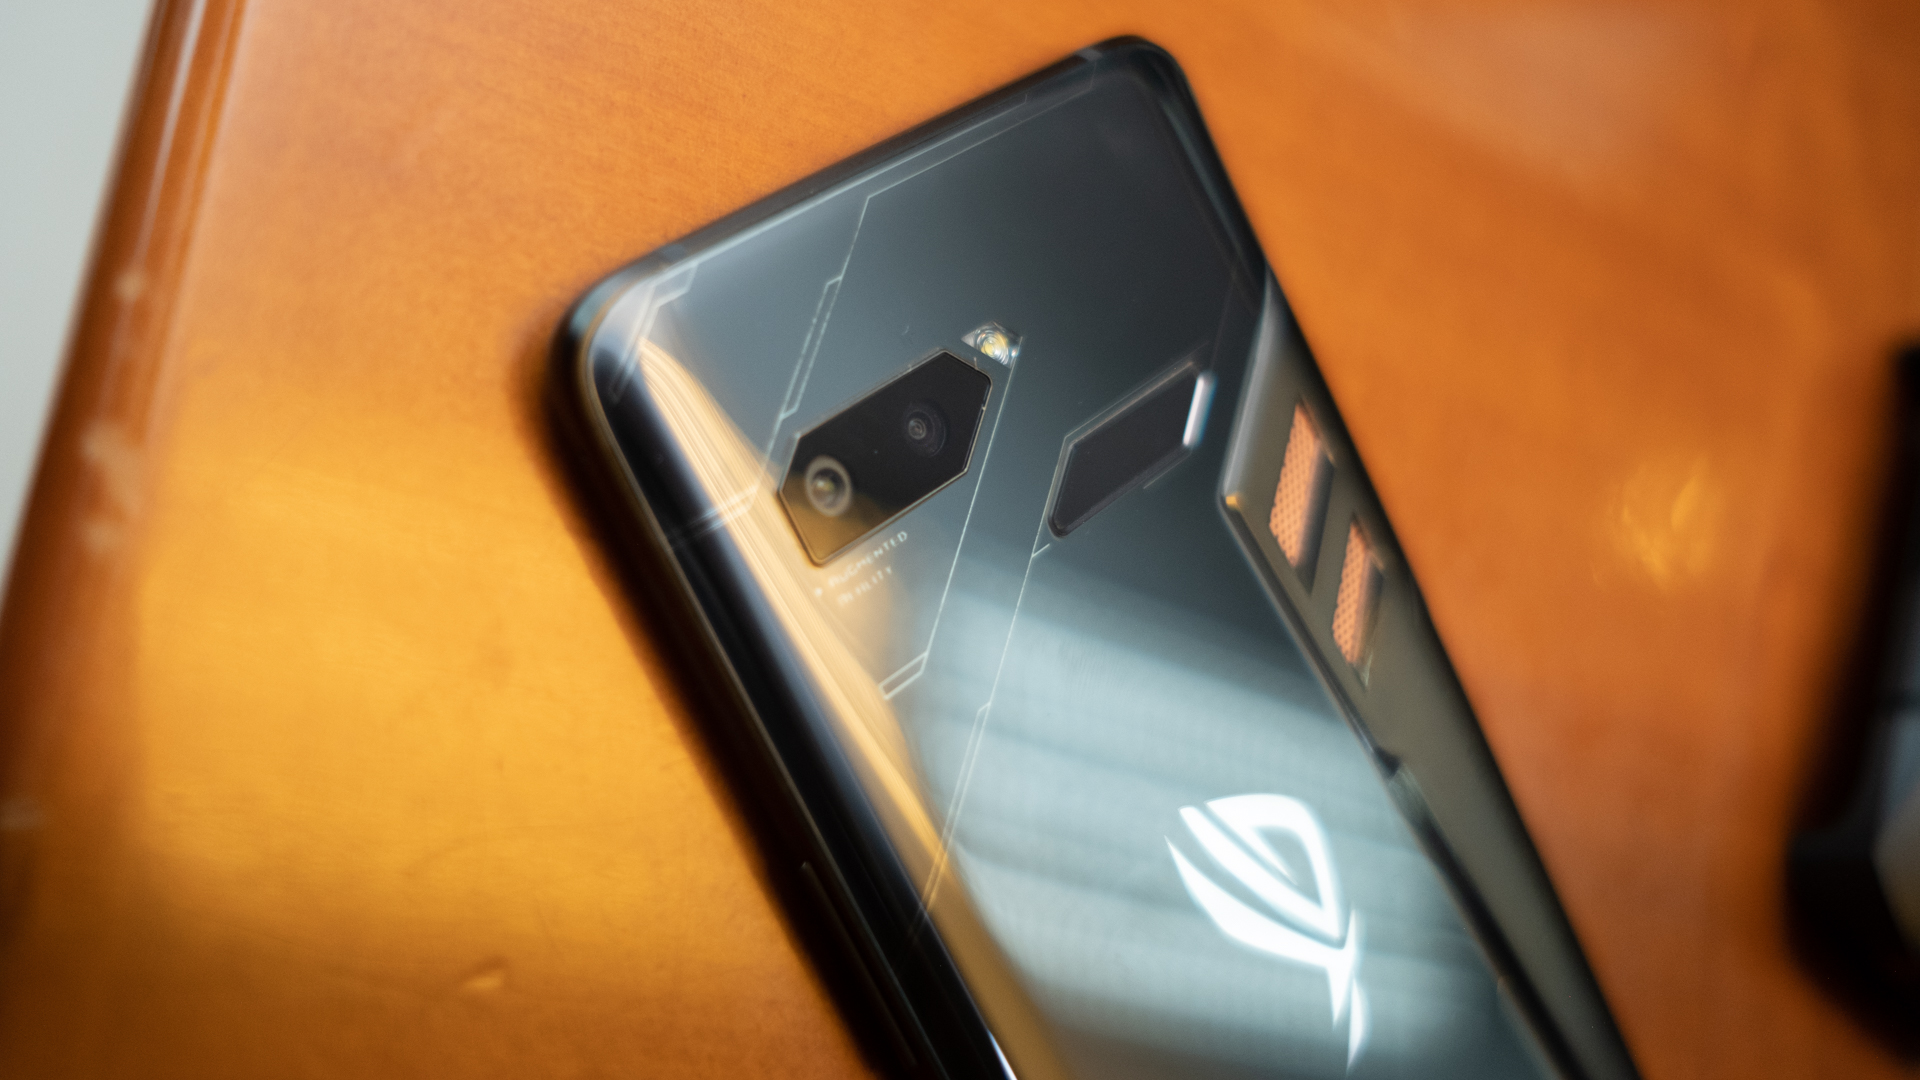 Asus ROG Phone slated to launch in India on November 29 | TechRadar